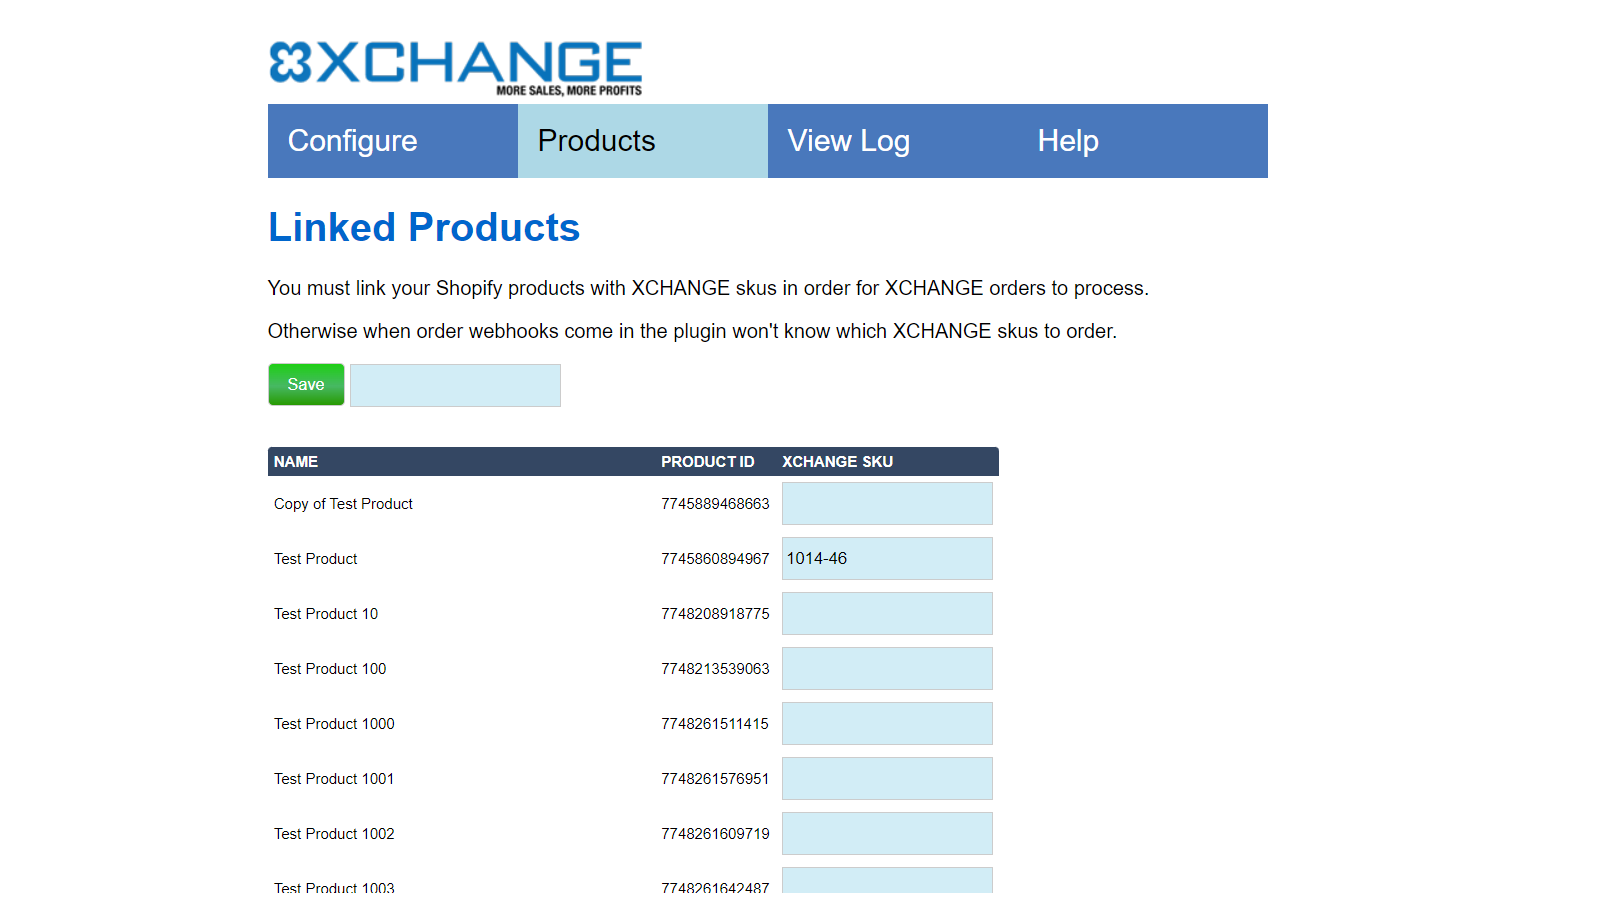 Products page where you connect your XCHANGE products